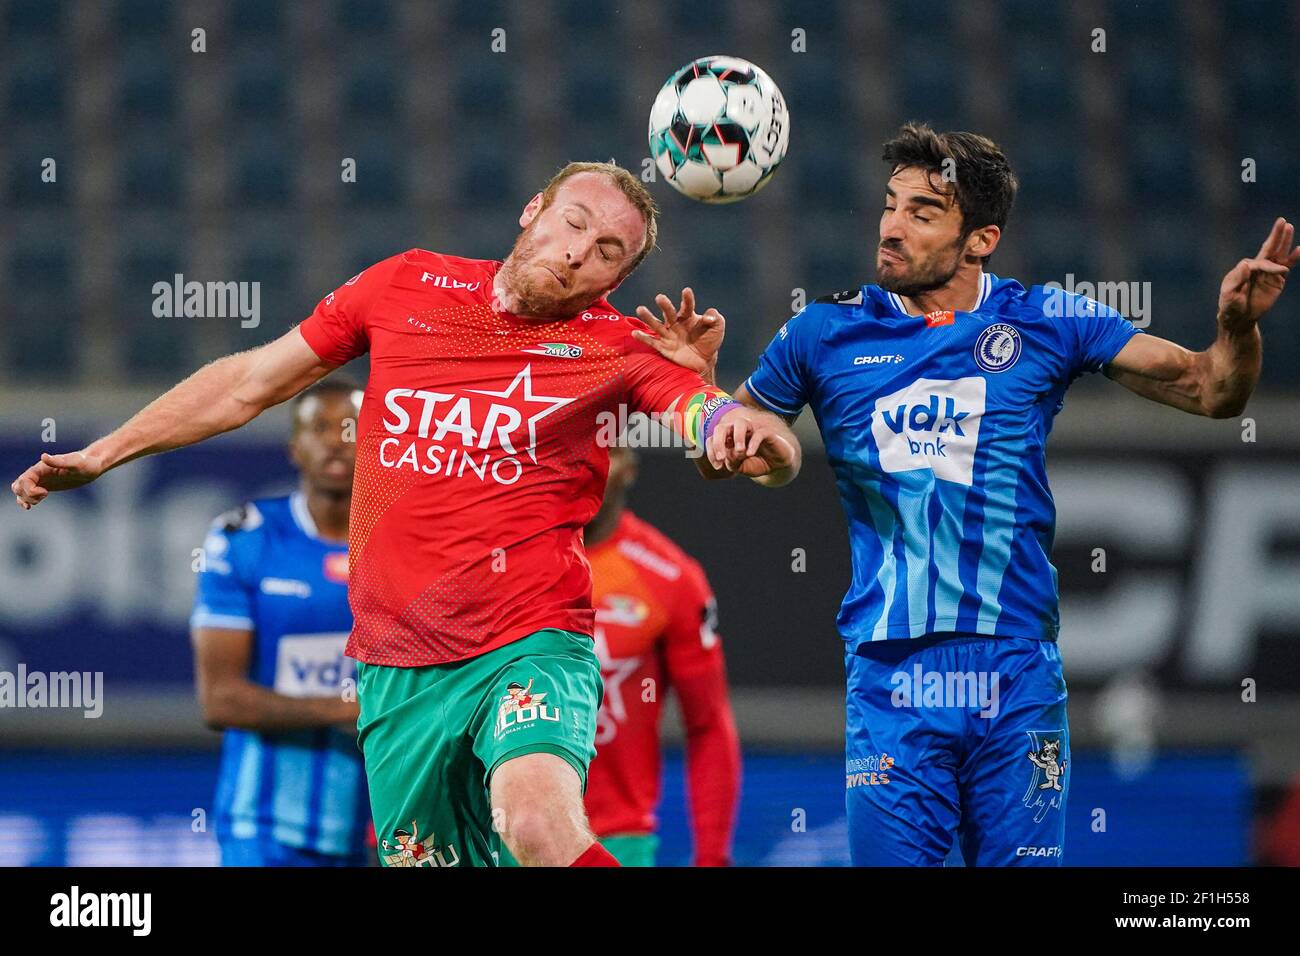 GENT, BELGIUM - MARCH 8: Kevin Vandendriessche of KV Oostende and Milad Mohammadi of KAA Gent during the Jupiler Pro League match between KAA Gent and Stock Photo